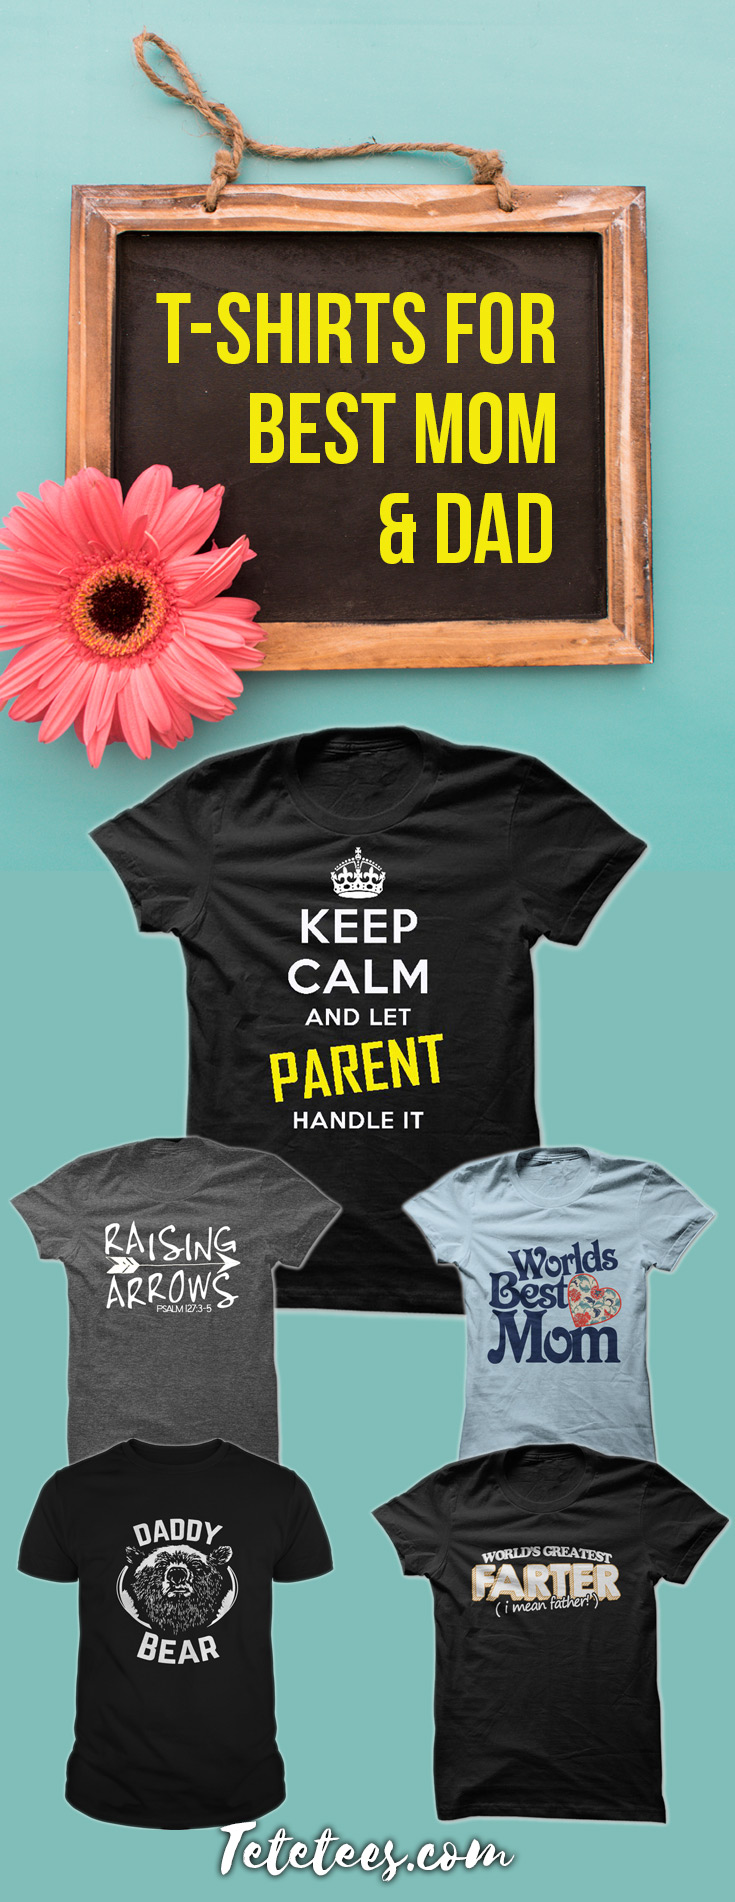 T-Shirts for Best Mom & Dad